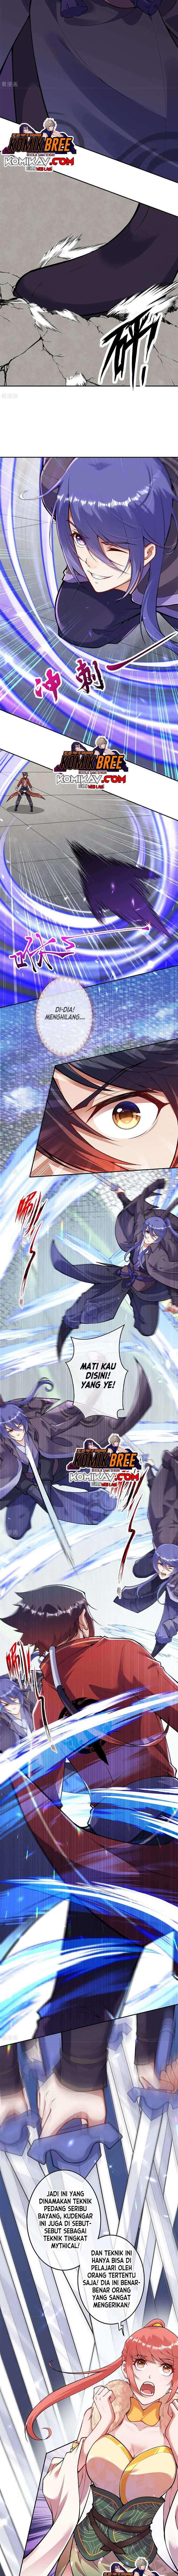 Invincible Sword Domain Chapter 80